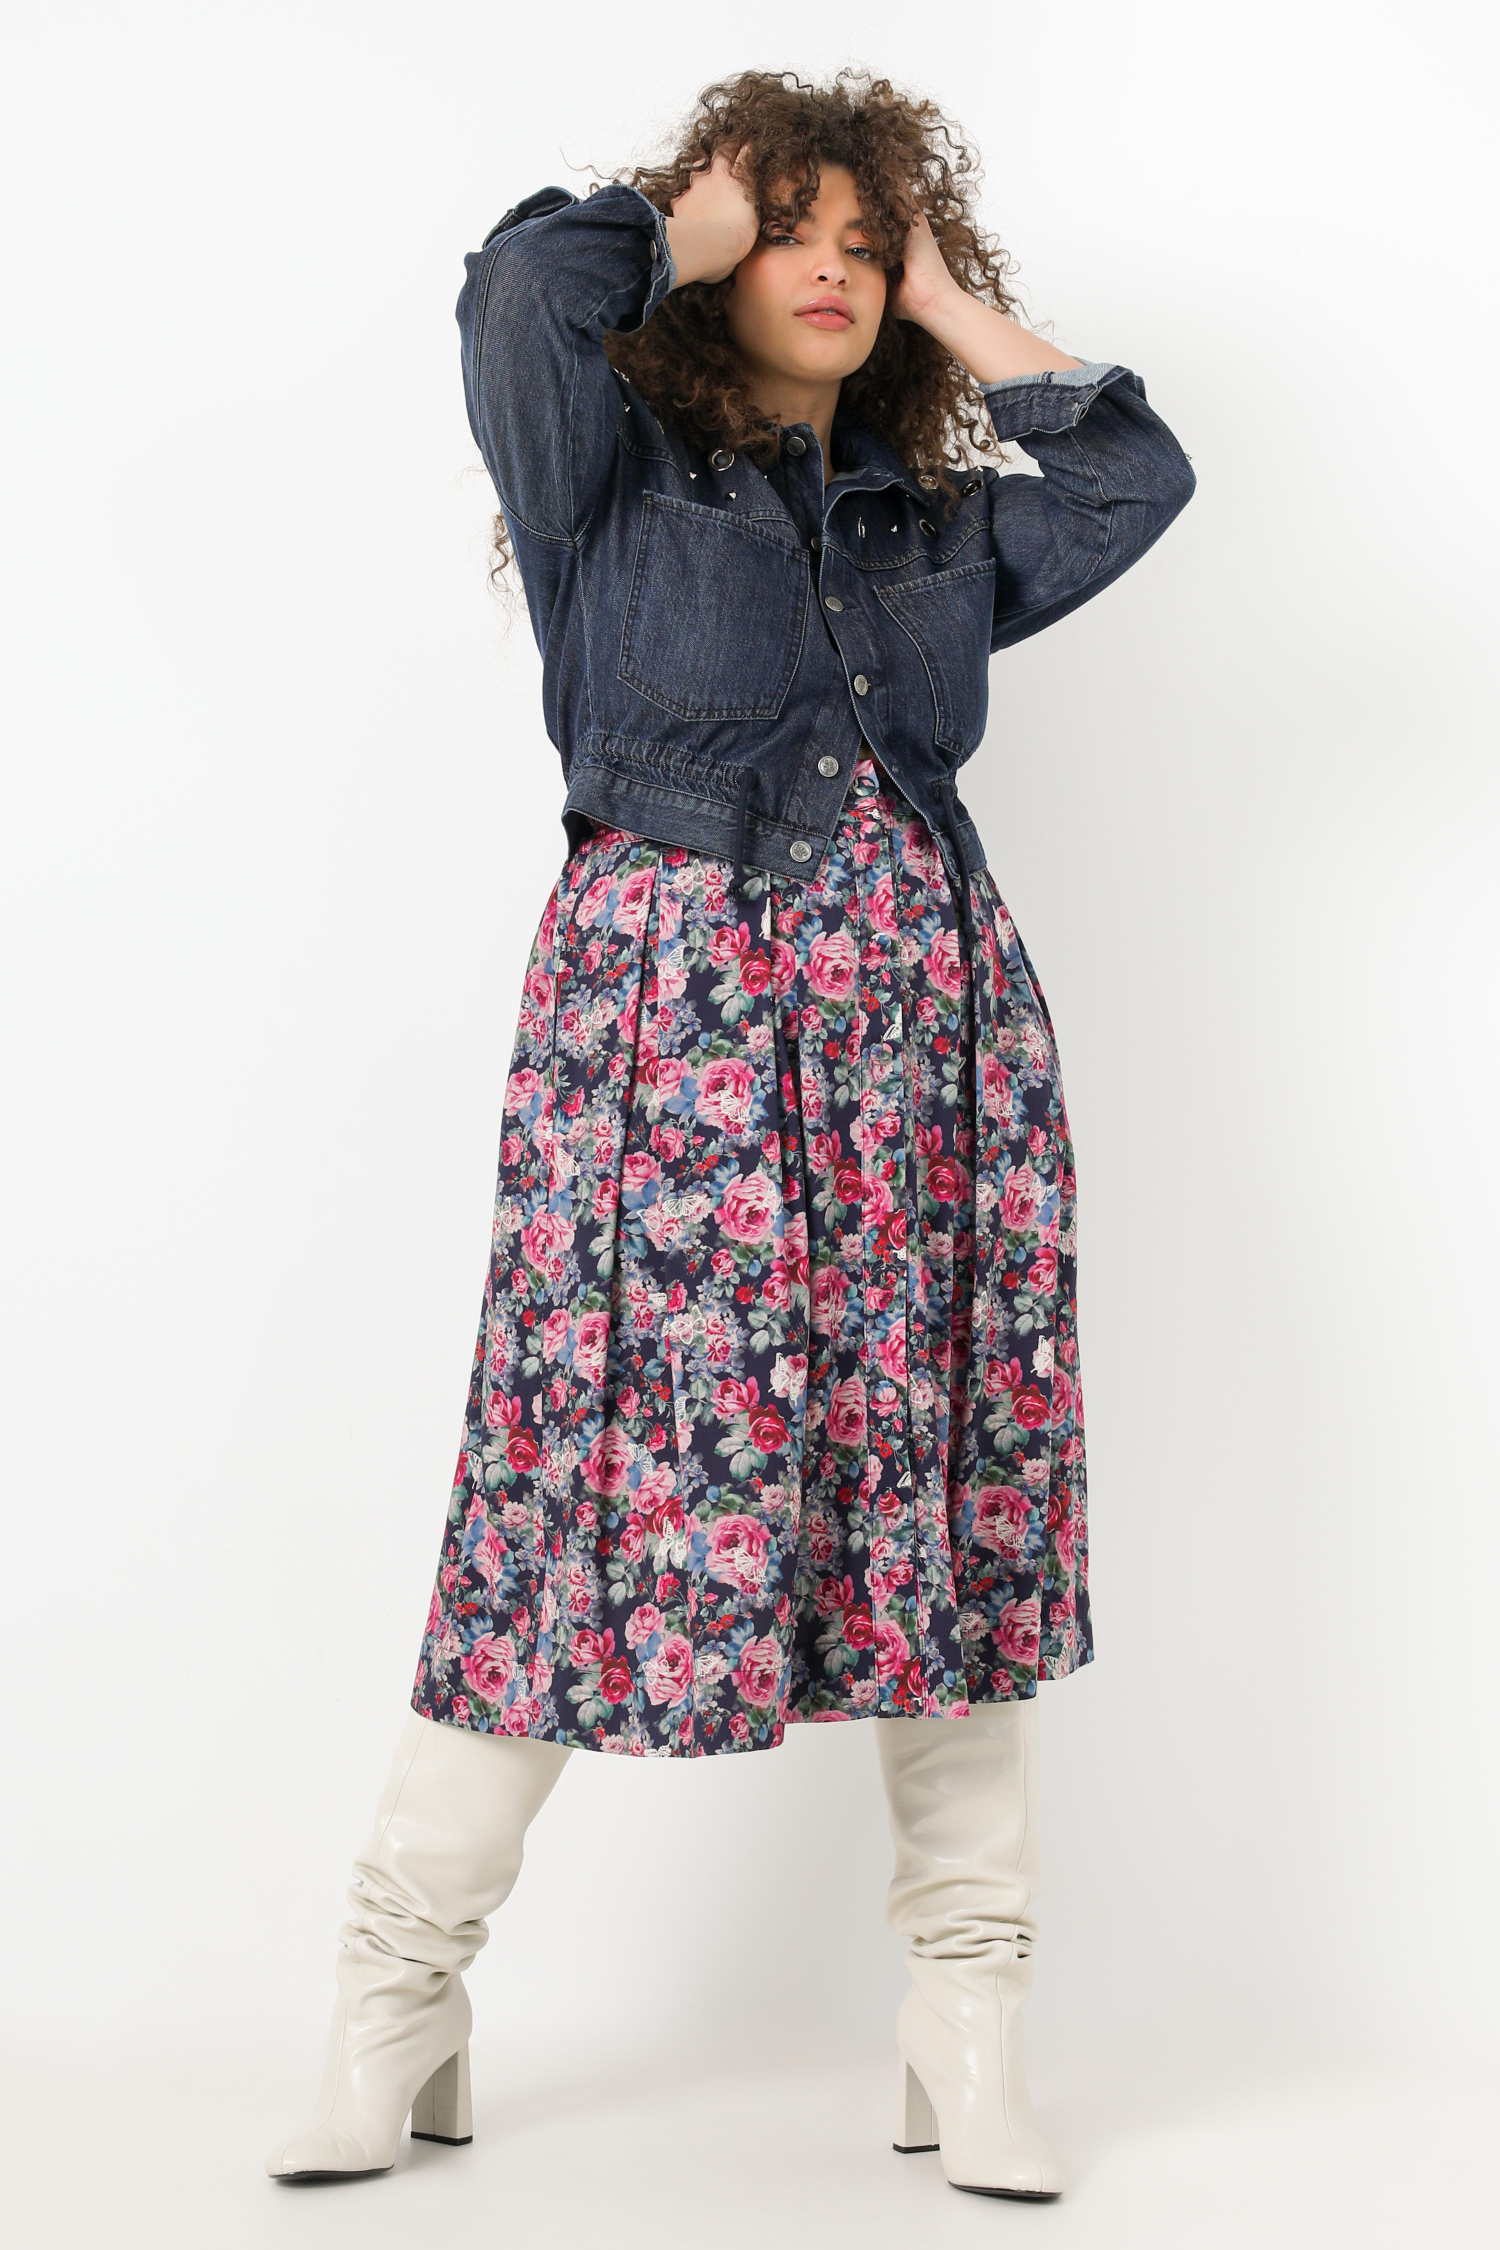 Printed skirt buttoned in front (Shipping February 20/25)